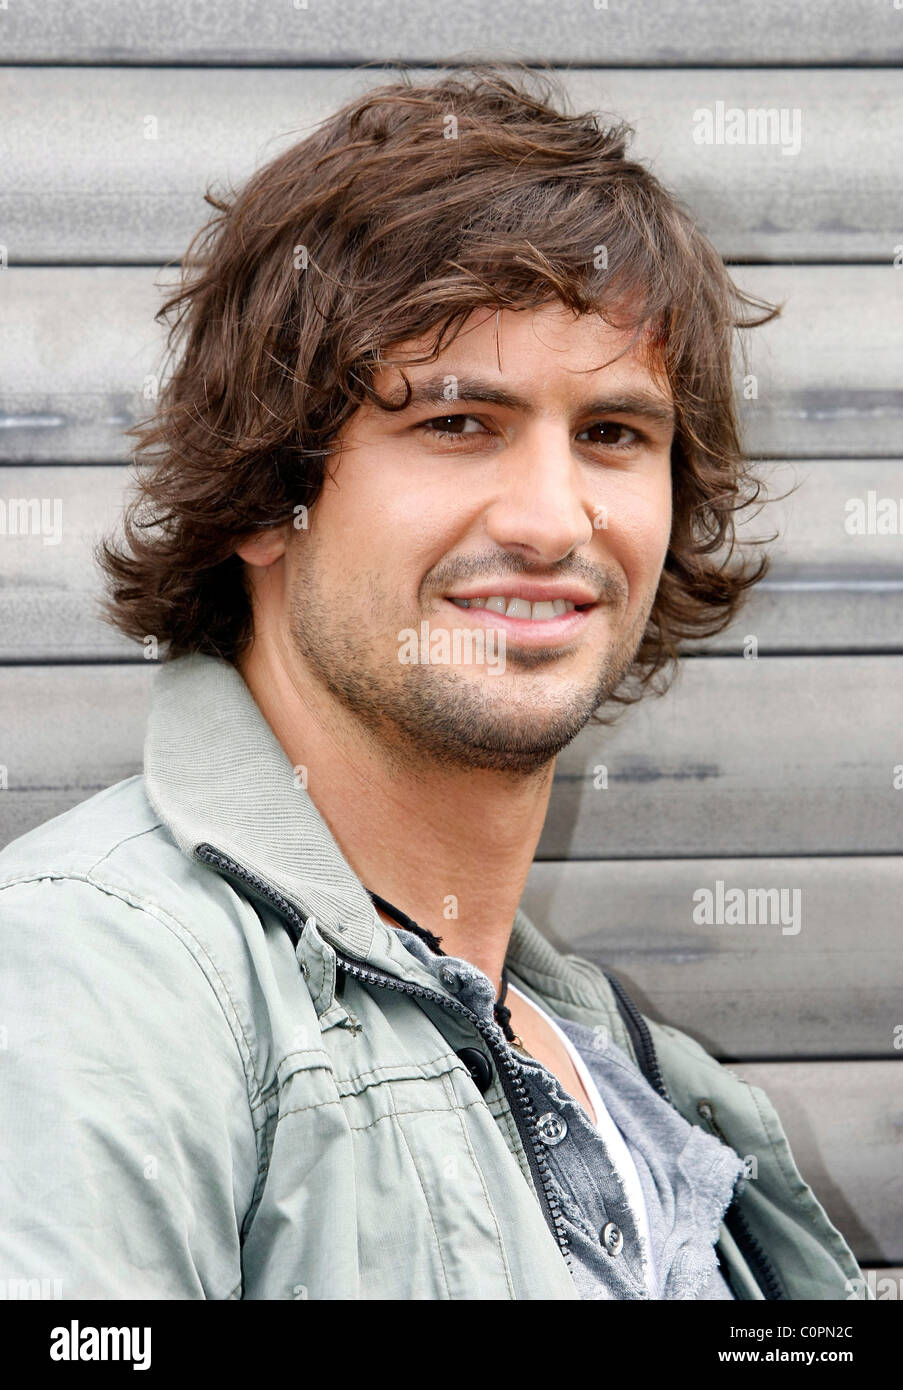 Tom Beck at a photocall for German TV series "Alarm für Cobra 11" Cologne,  Germany - 11.07.08 Stock Photo - Alamy